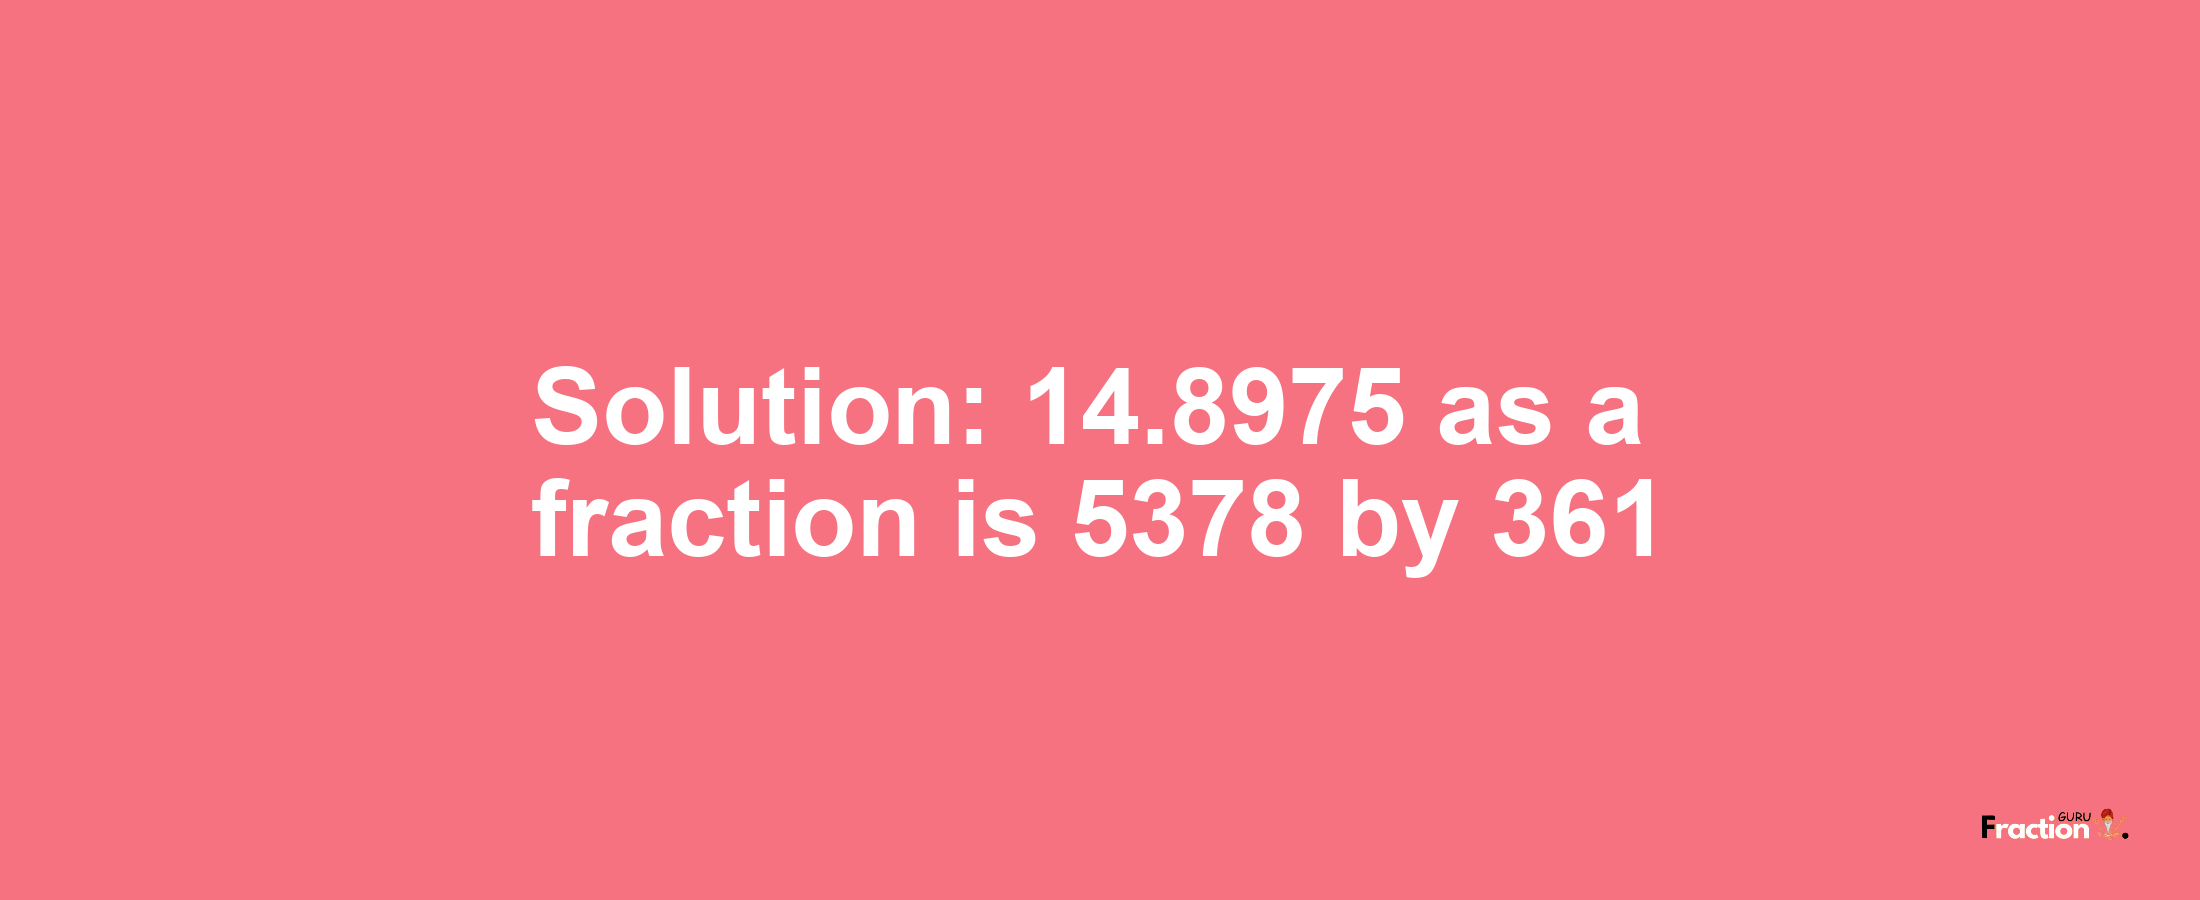 Solution:14.8975 as a fraction is 5378/361